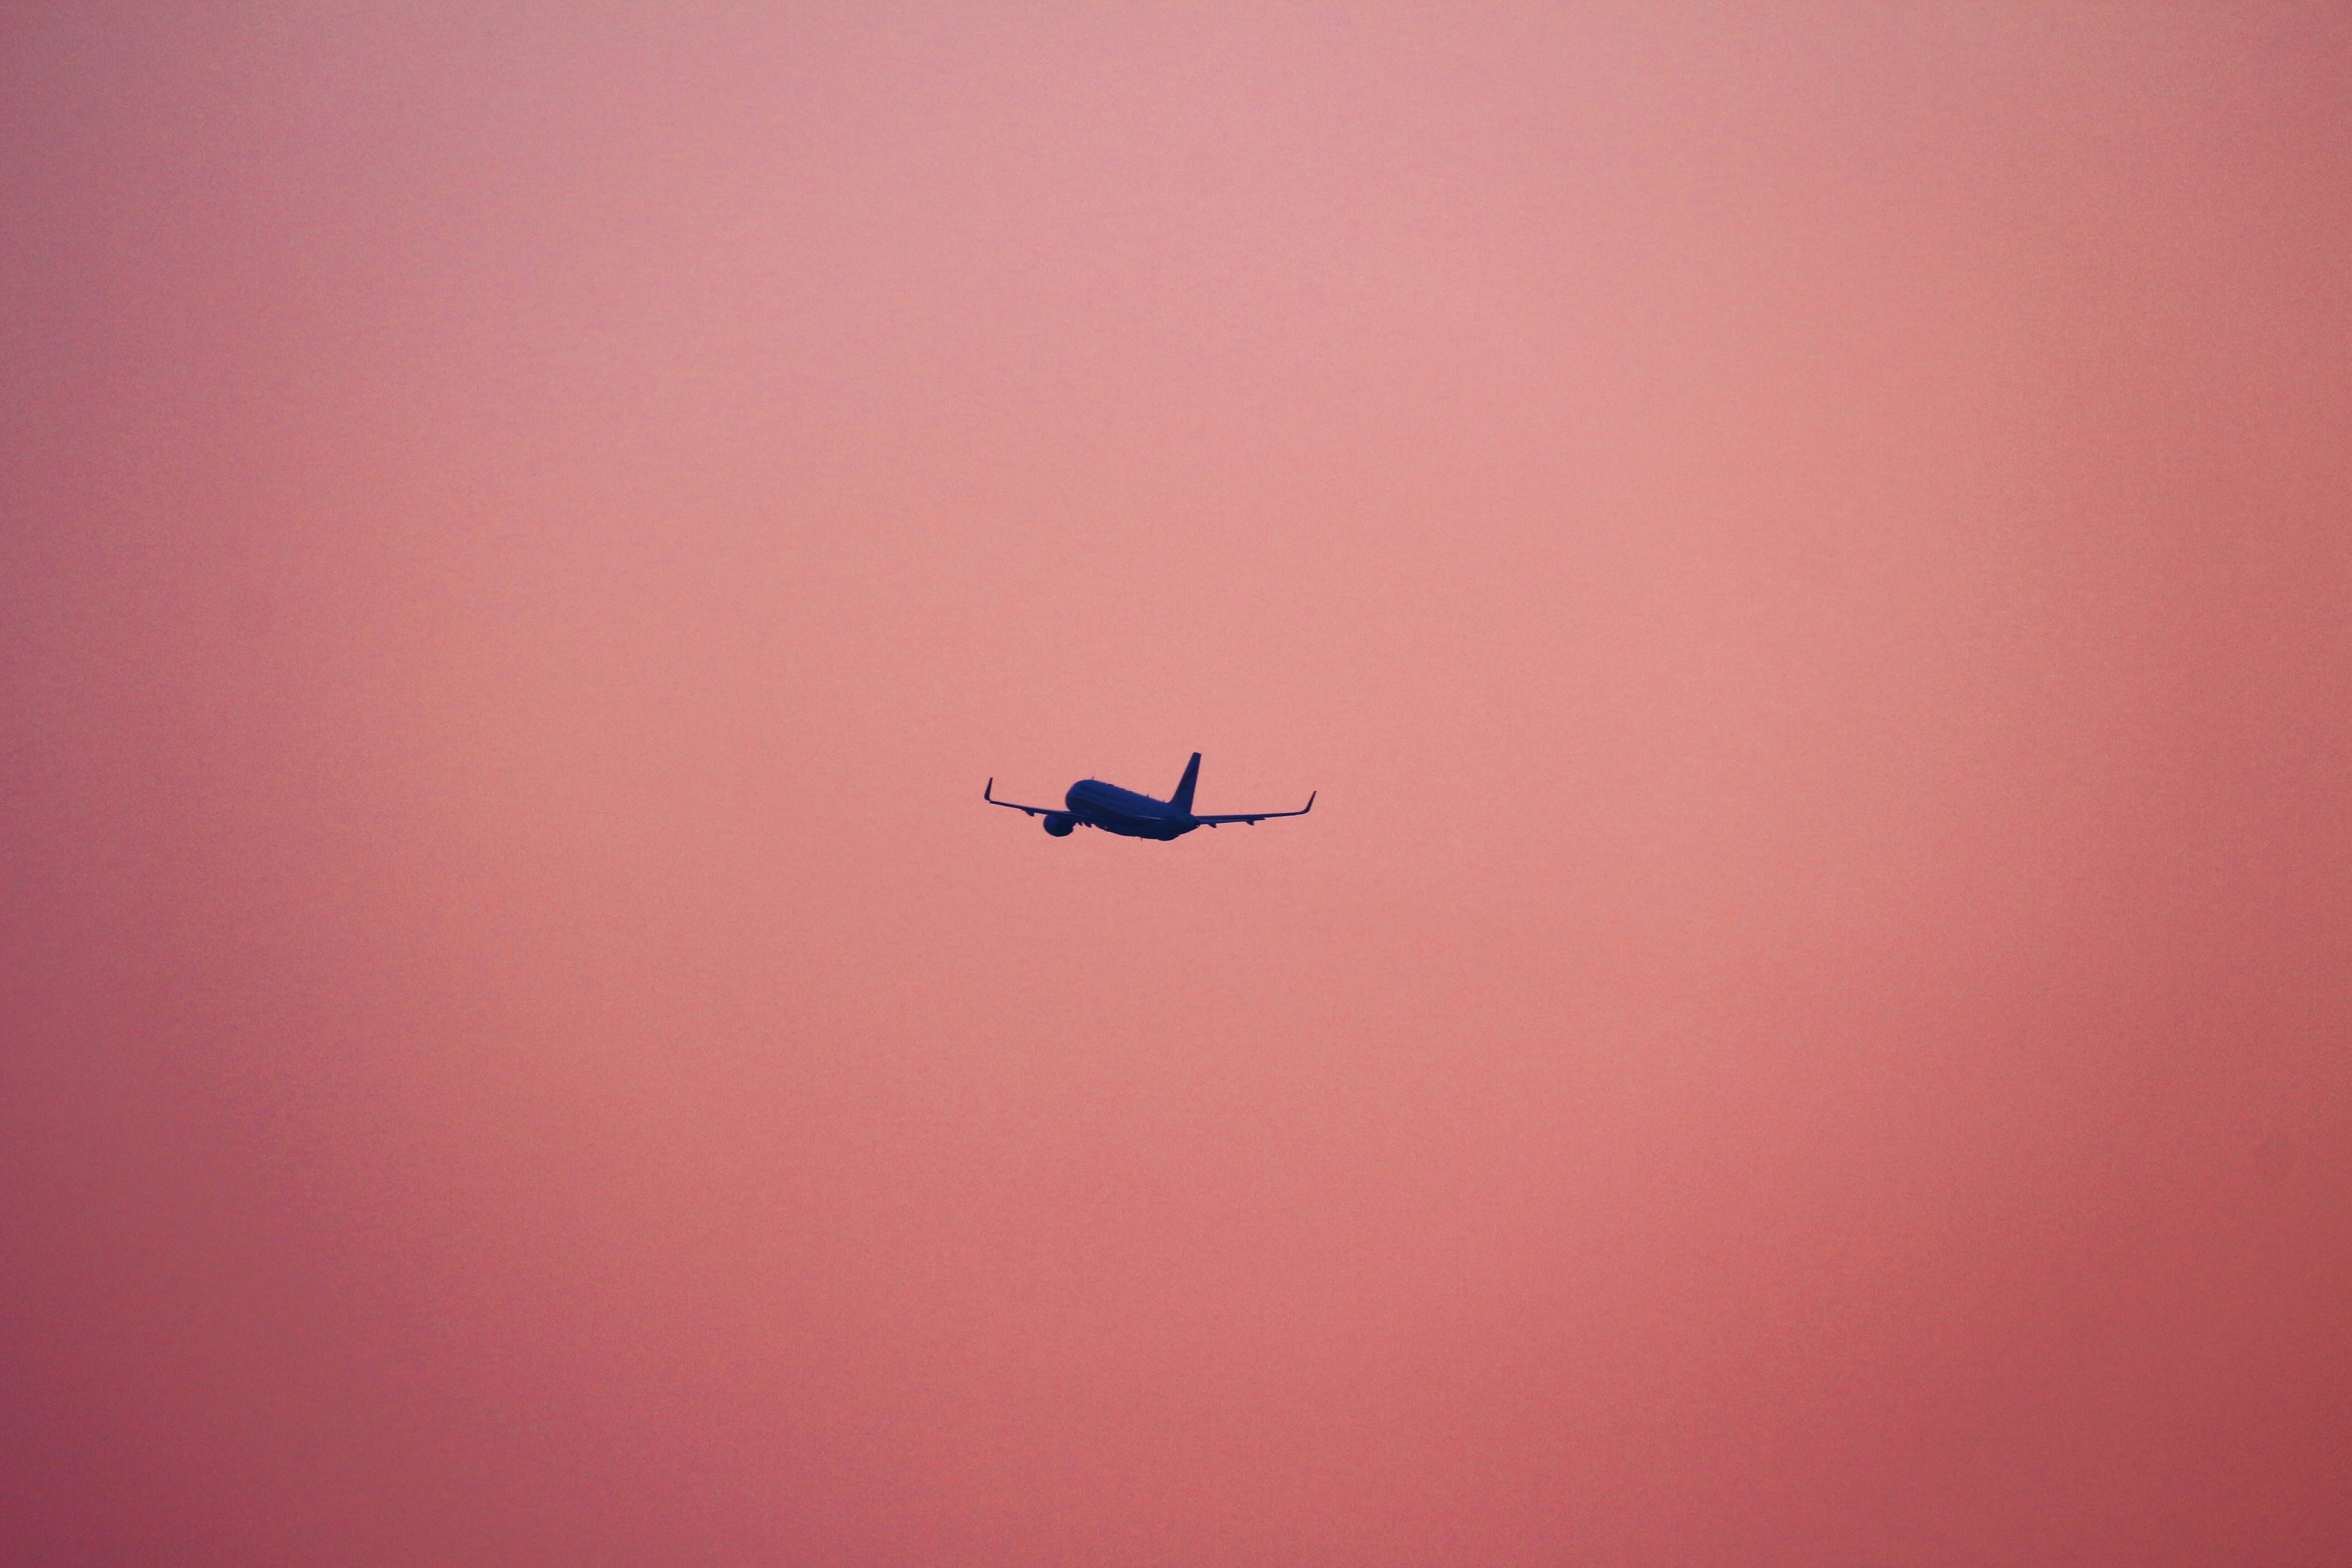 plane flying on pink background